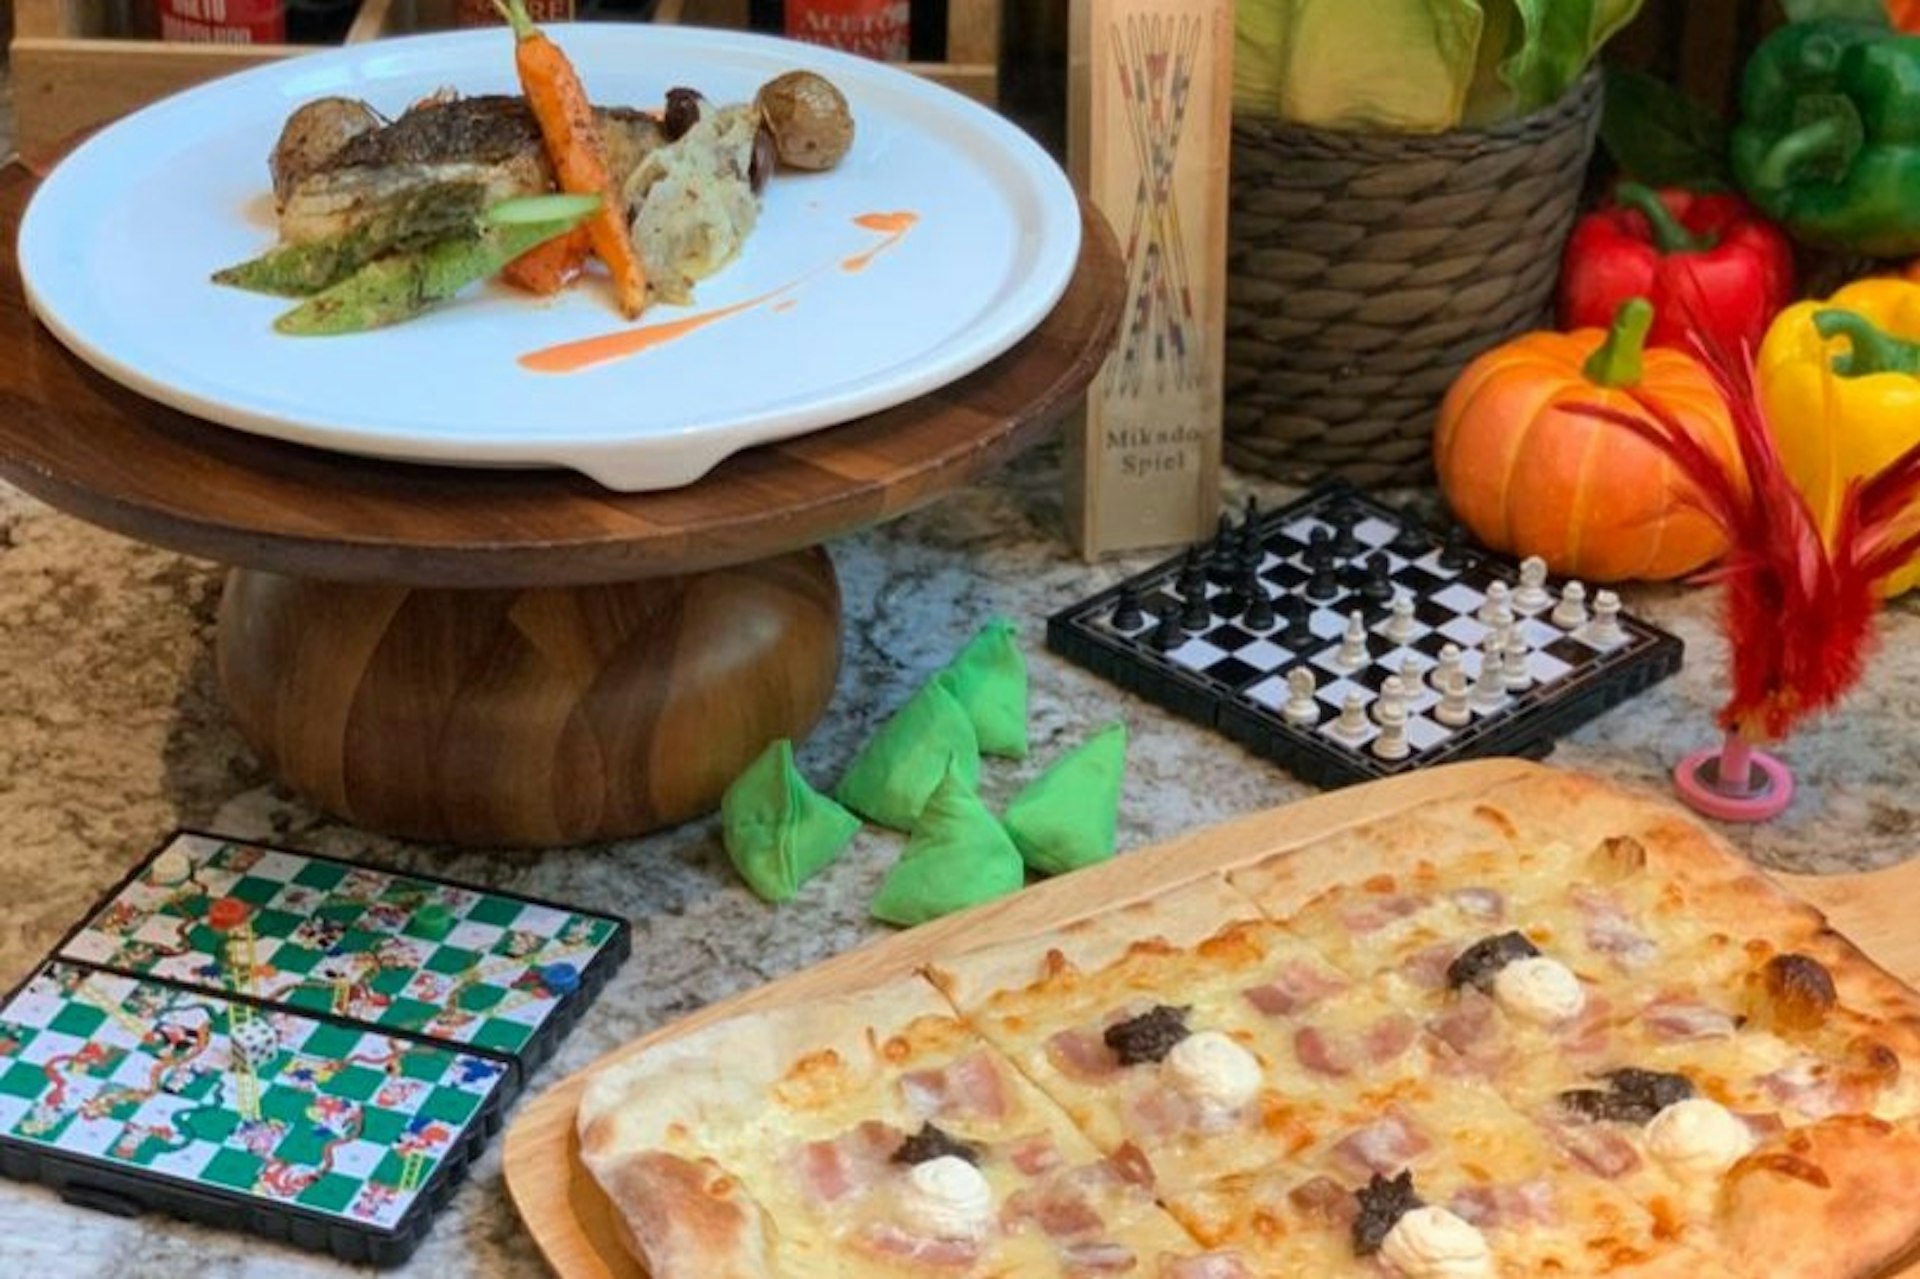 Board games beside plates of food